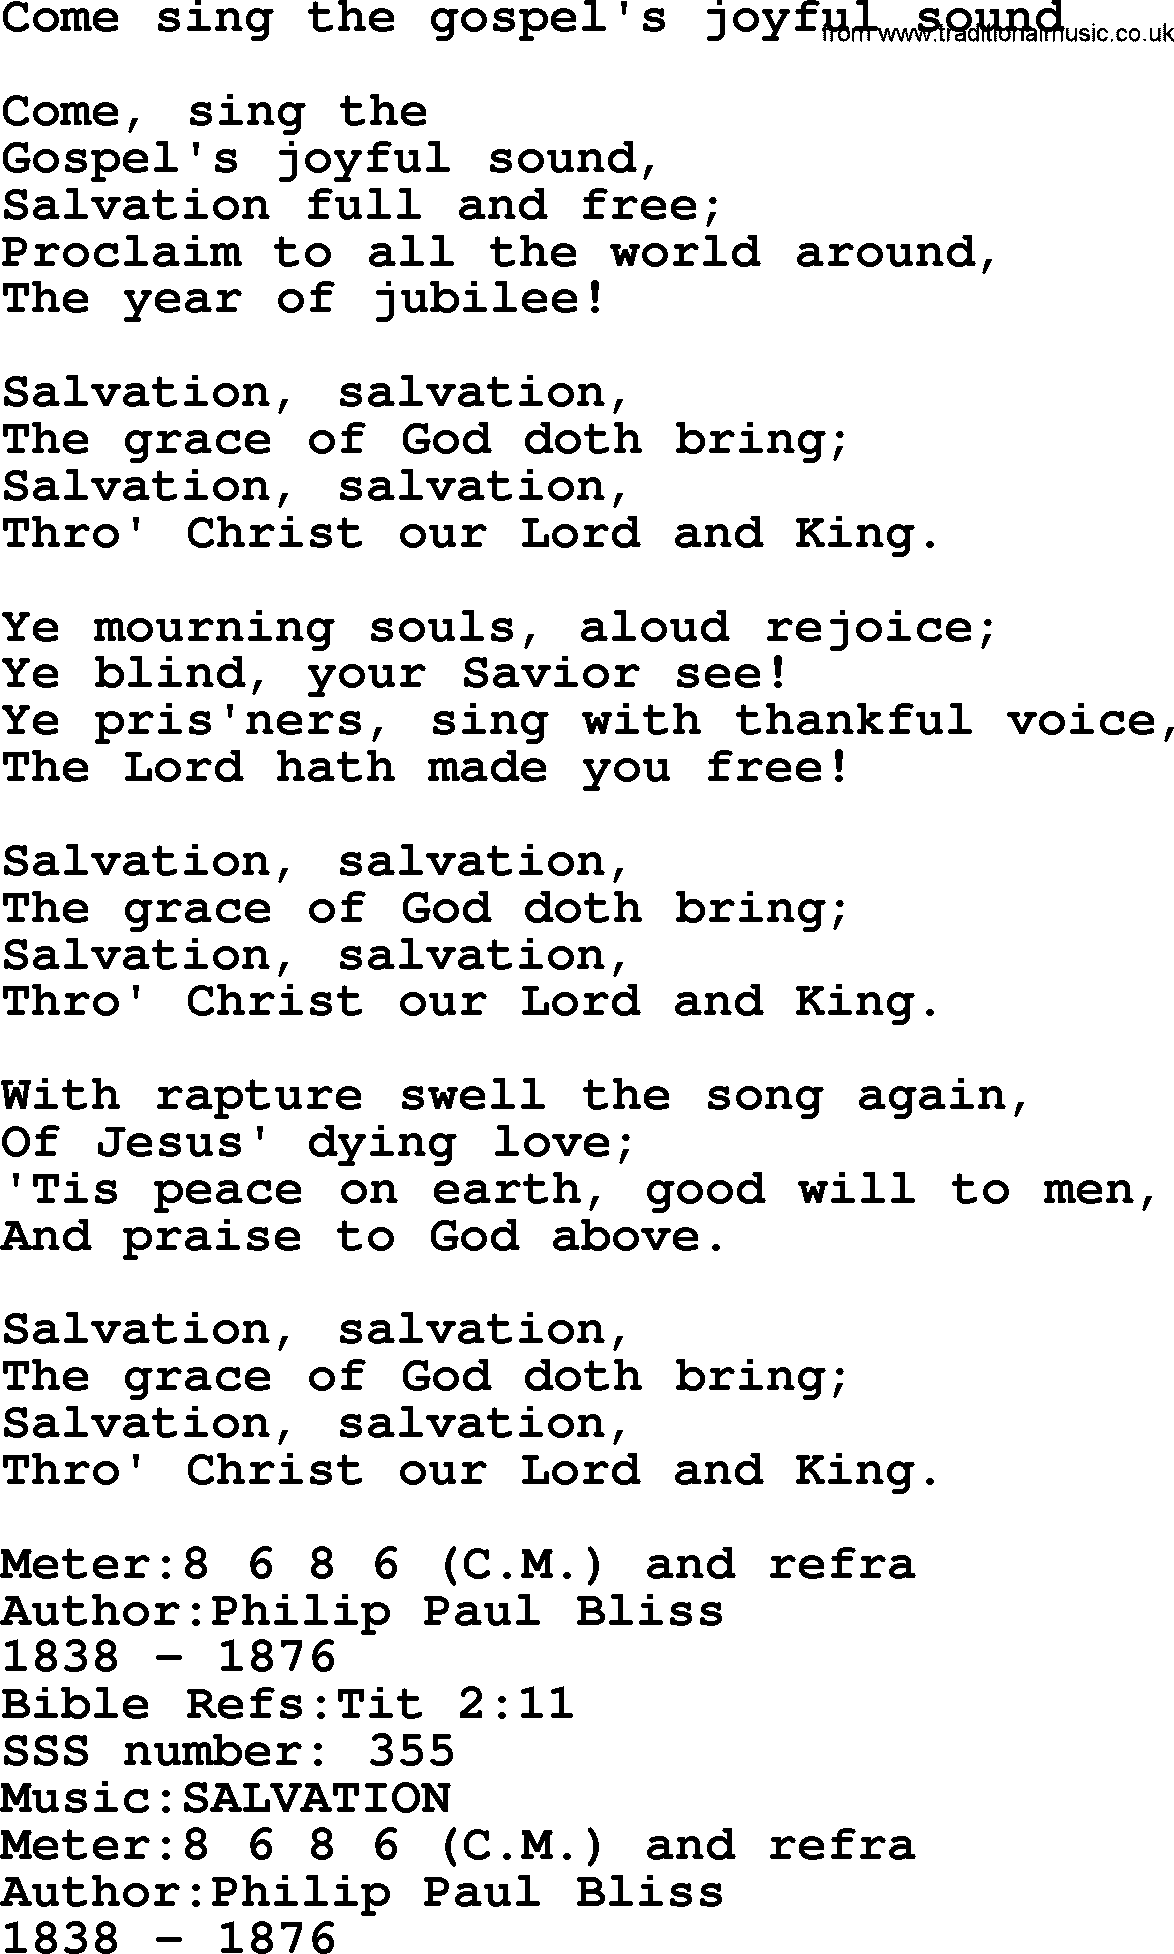 Sacred Songs and Solos complete, 1200 Hymns, title: Come Sing The Gospel's Joyful Sound, lyrics and PDF